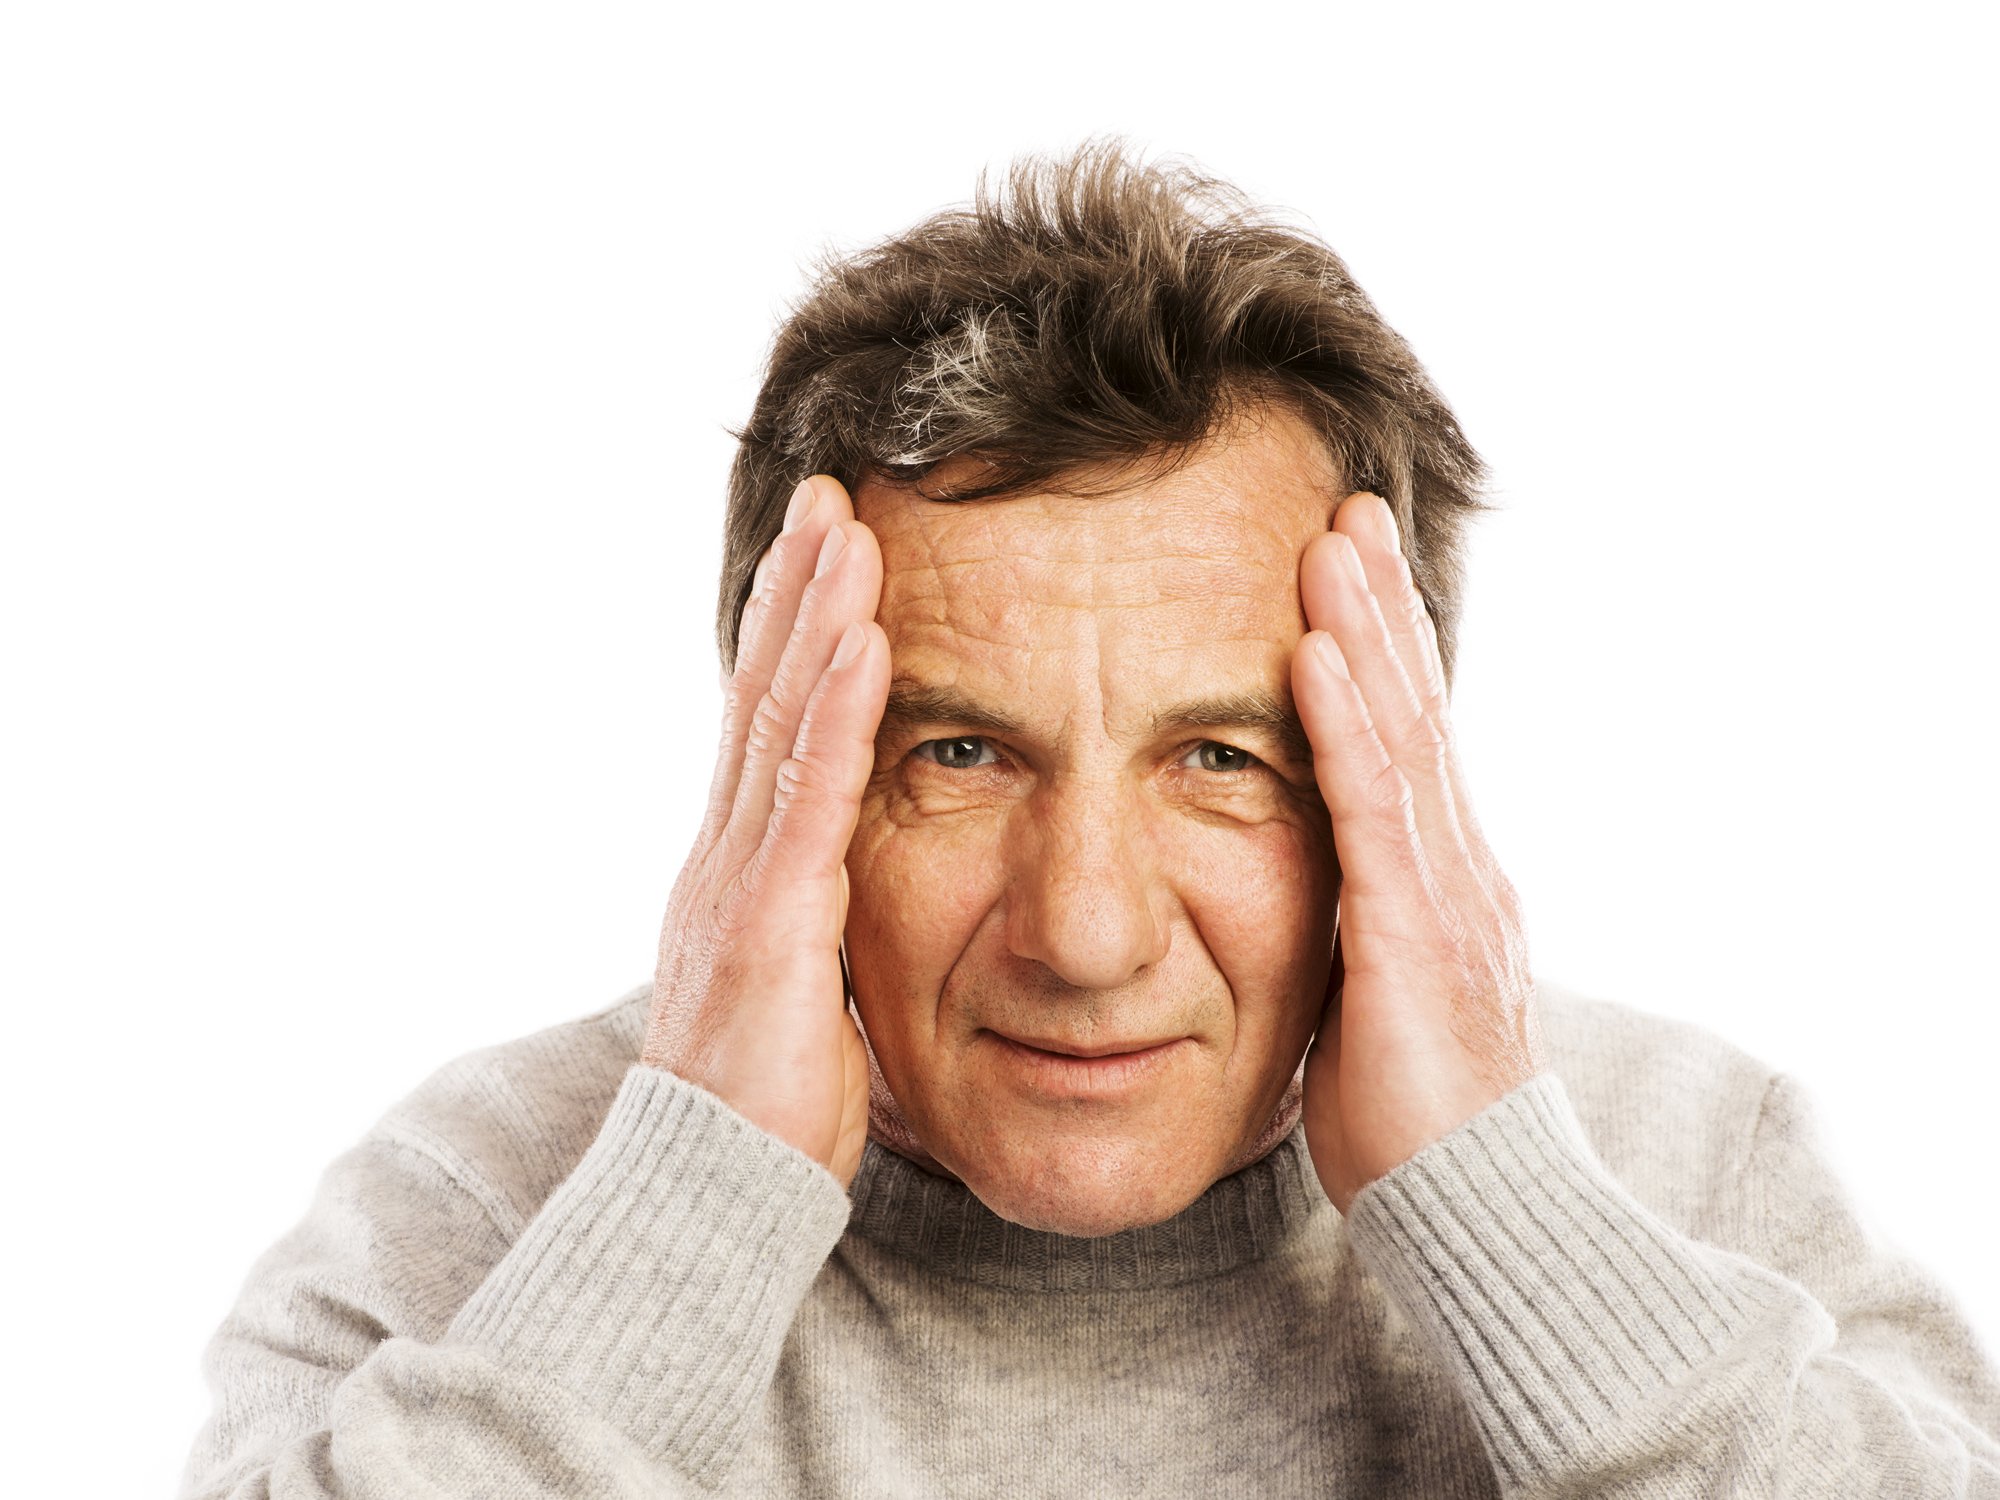 Orthostatic hypotension increases dementia risk 54 percent ...